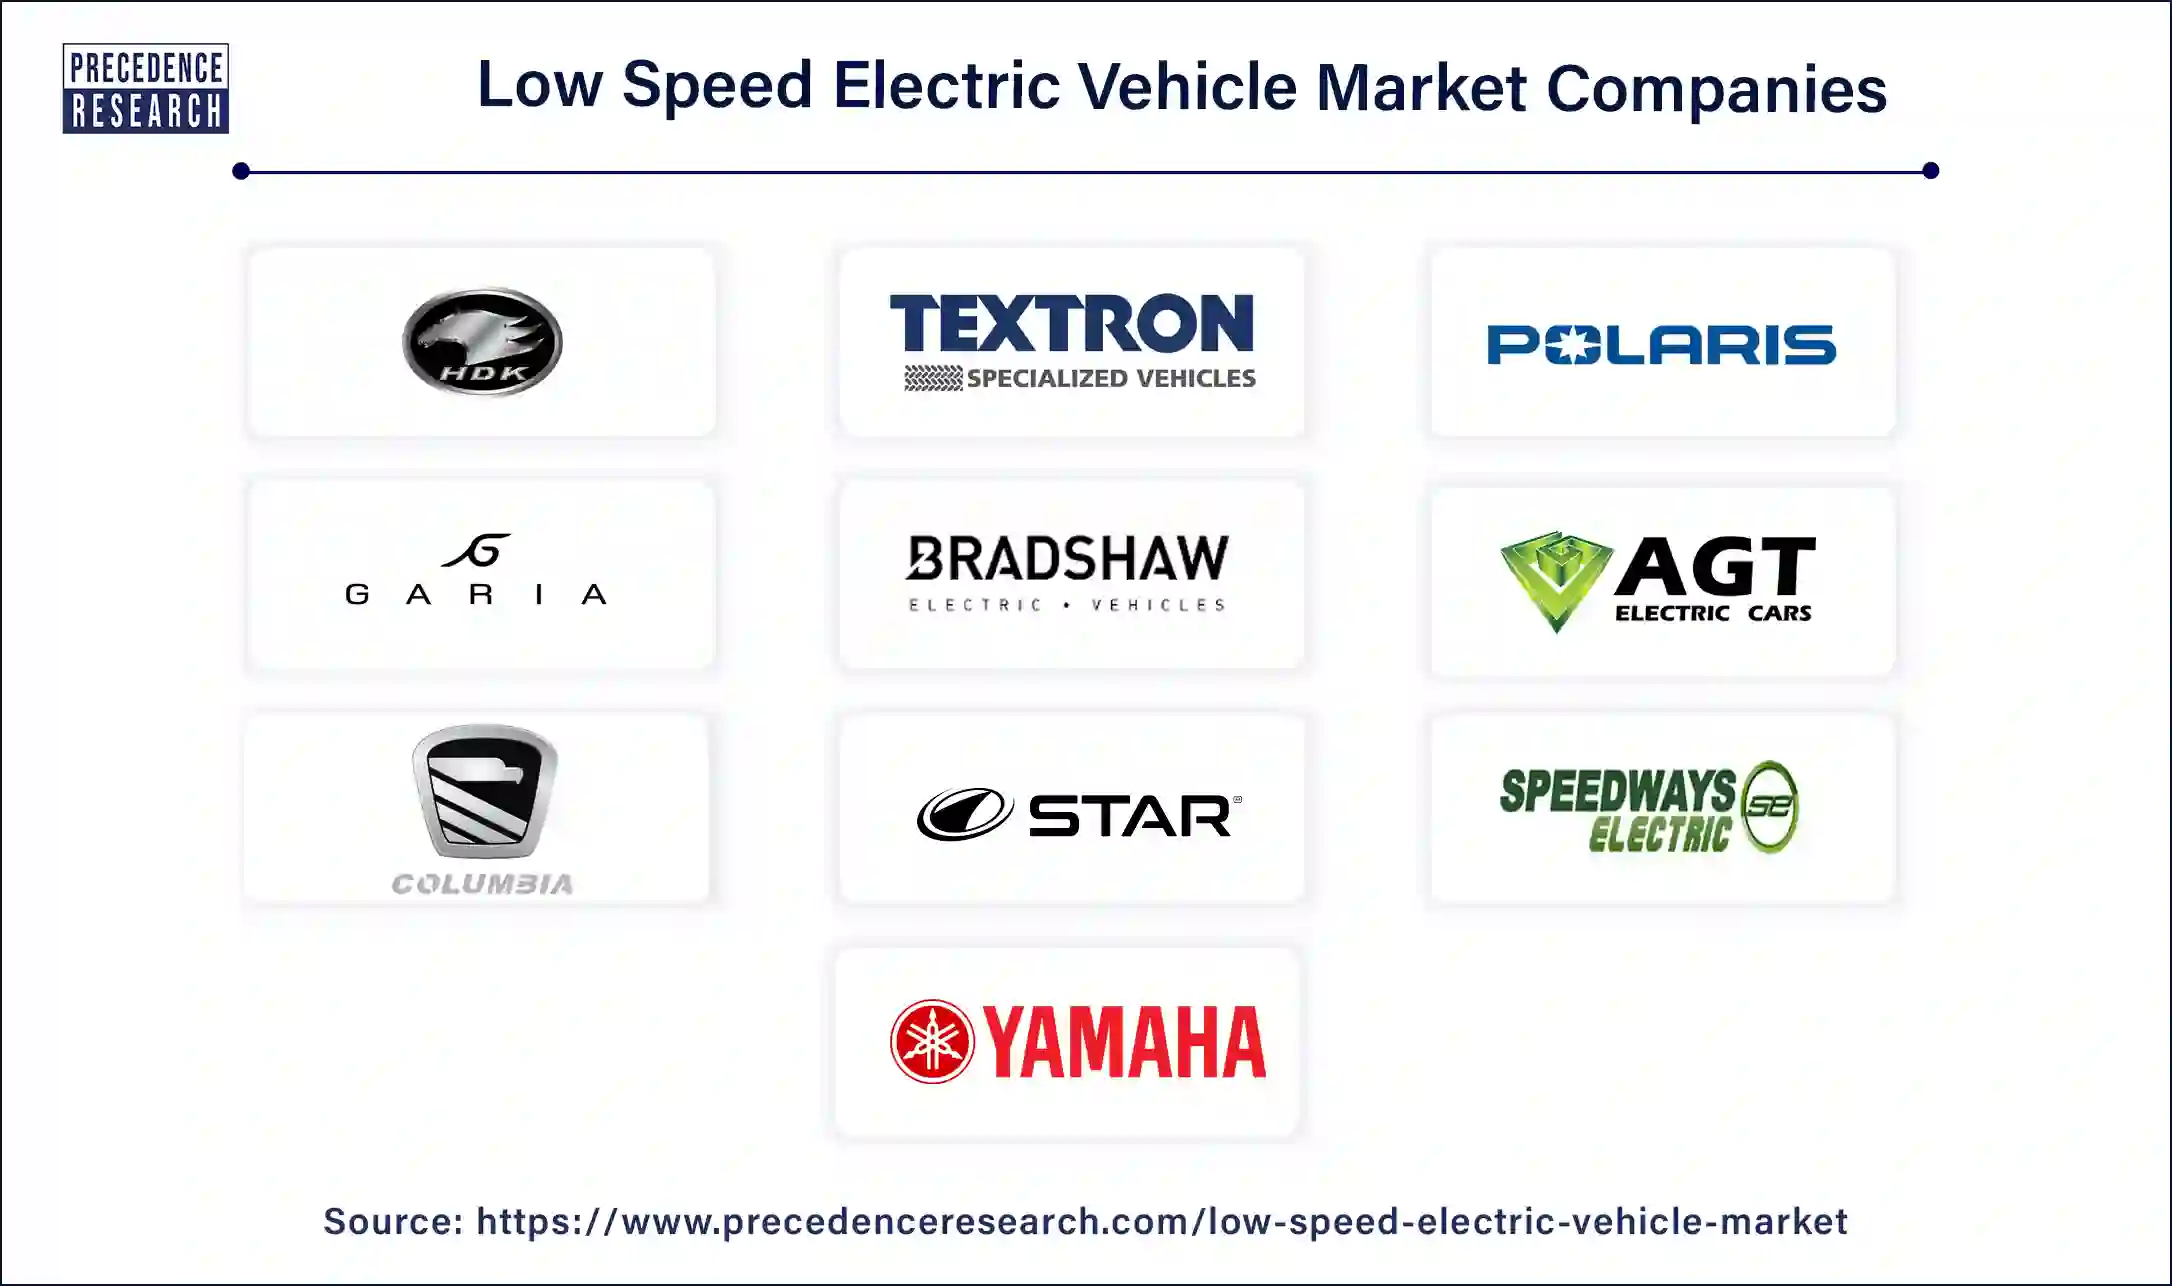 Low Speed Electric Vehicle Companies